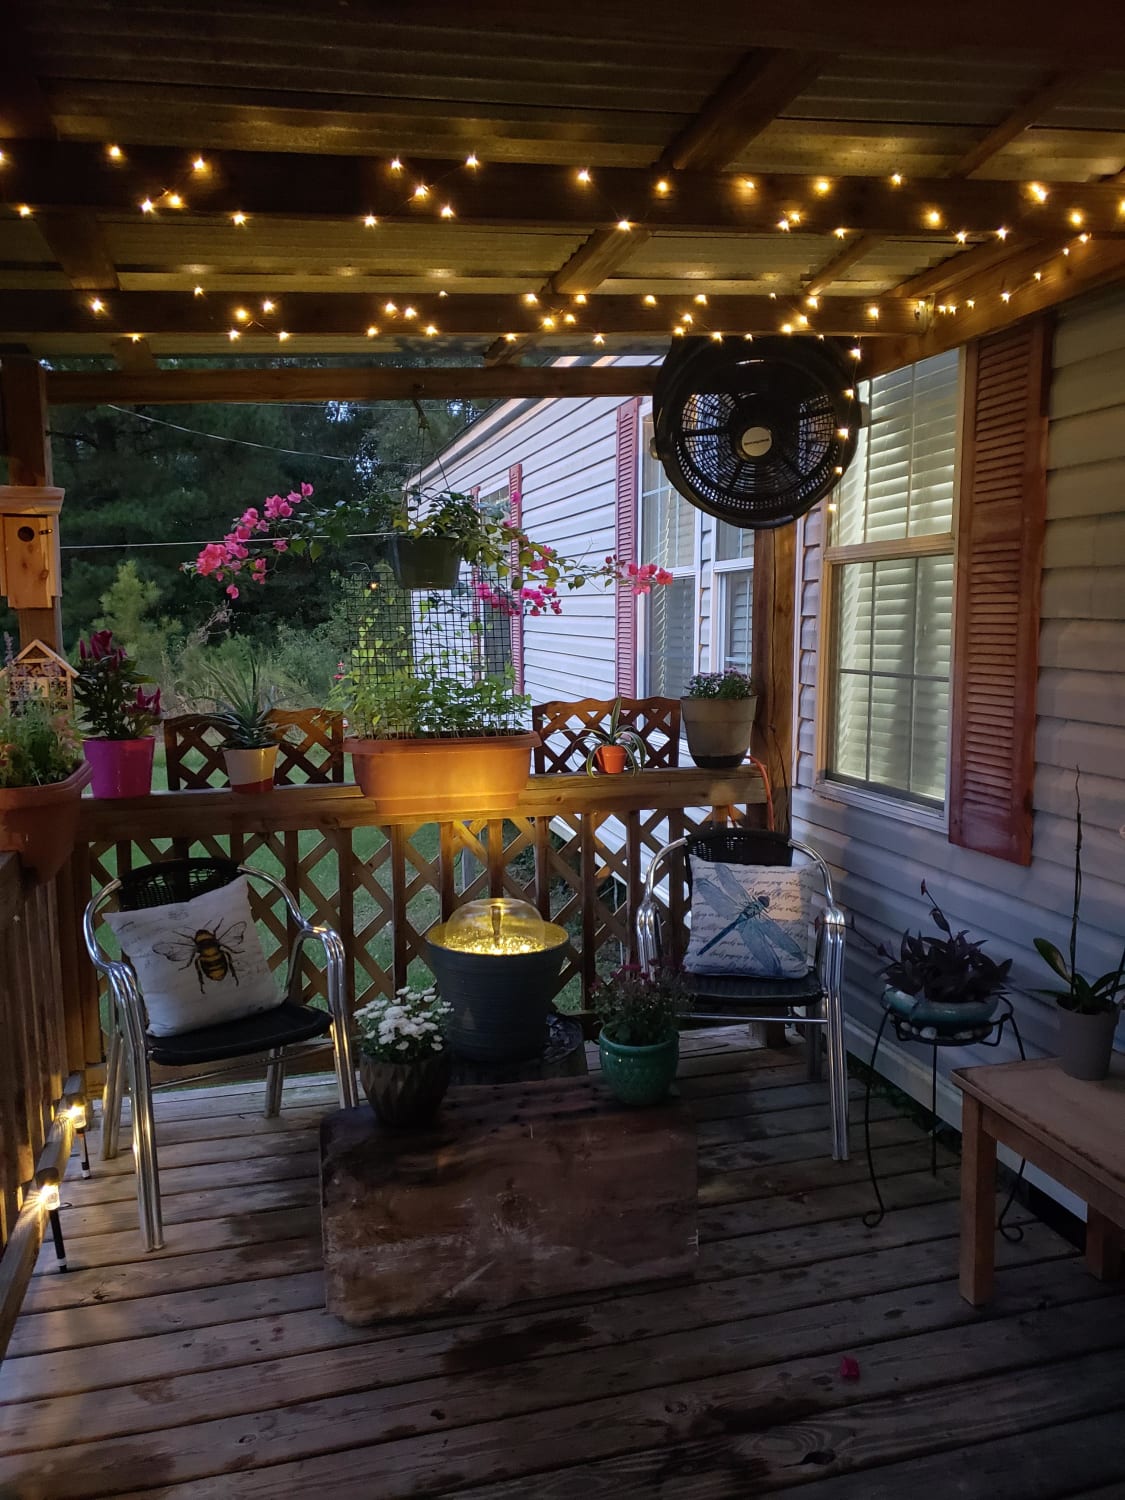 Finally finished my cozy relaxing porch